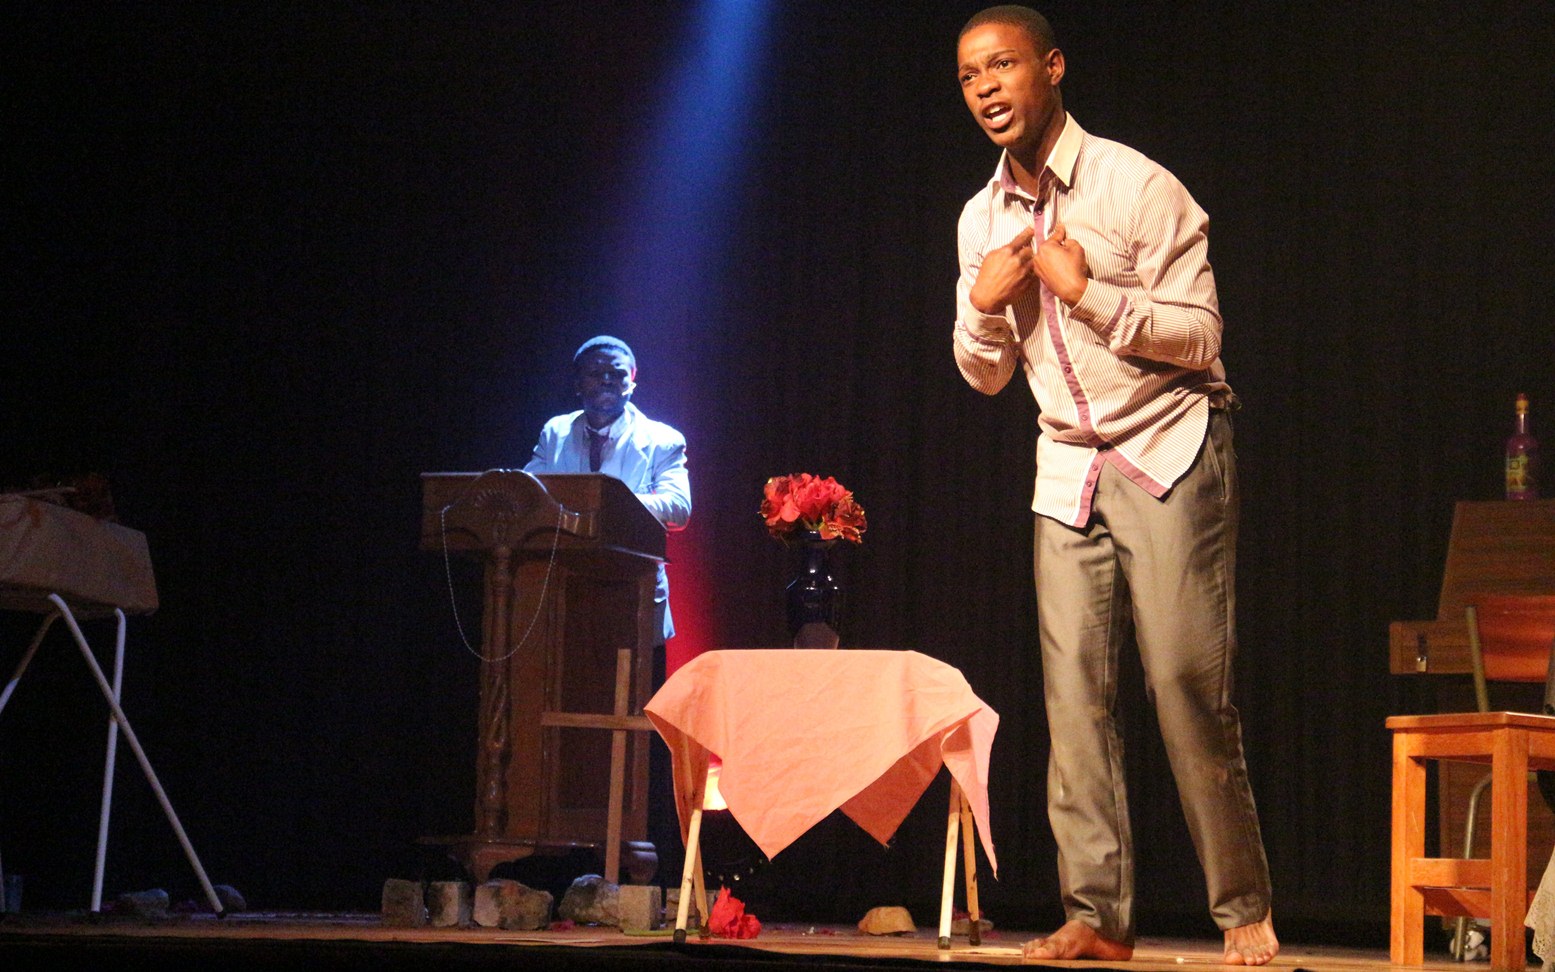 Thabiso Newman on stage with Siyabulela Marinana in the background.